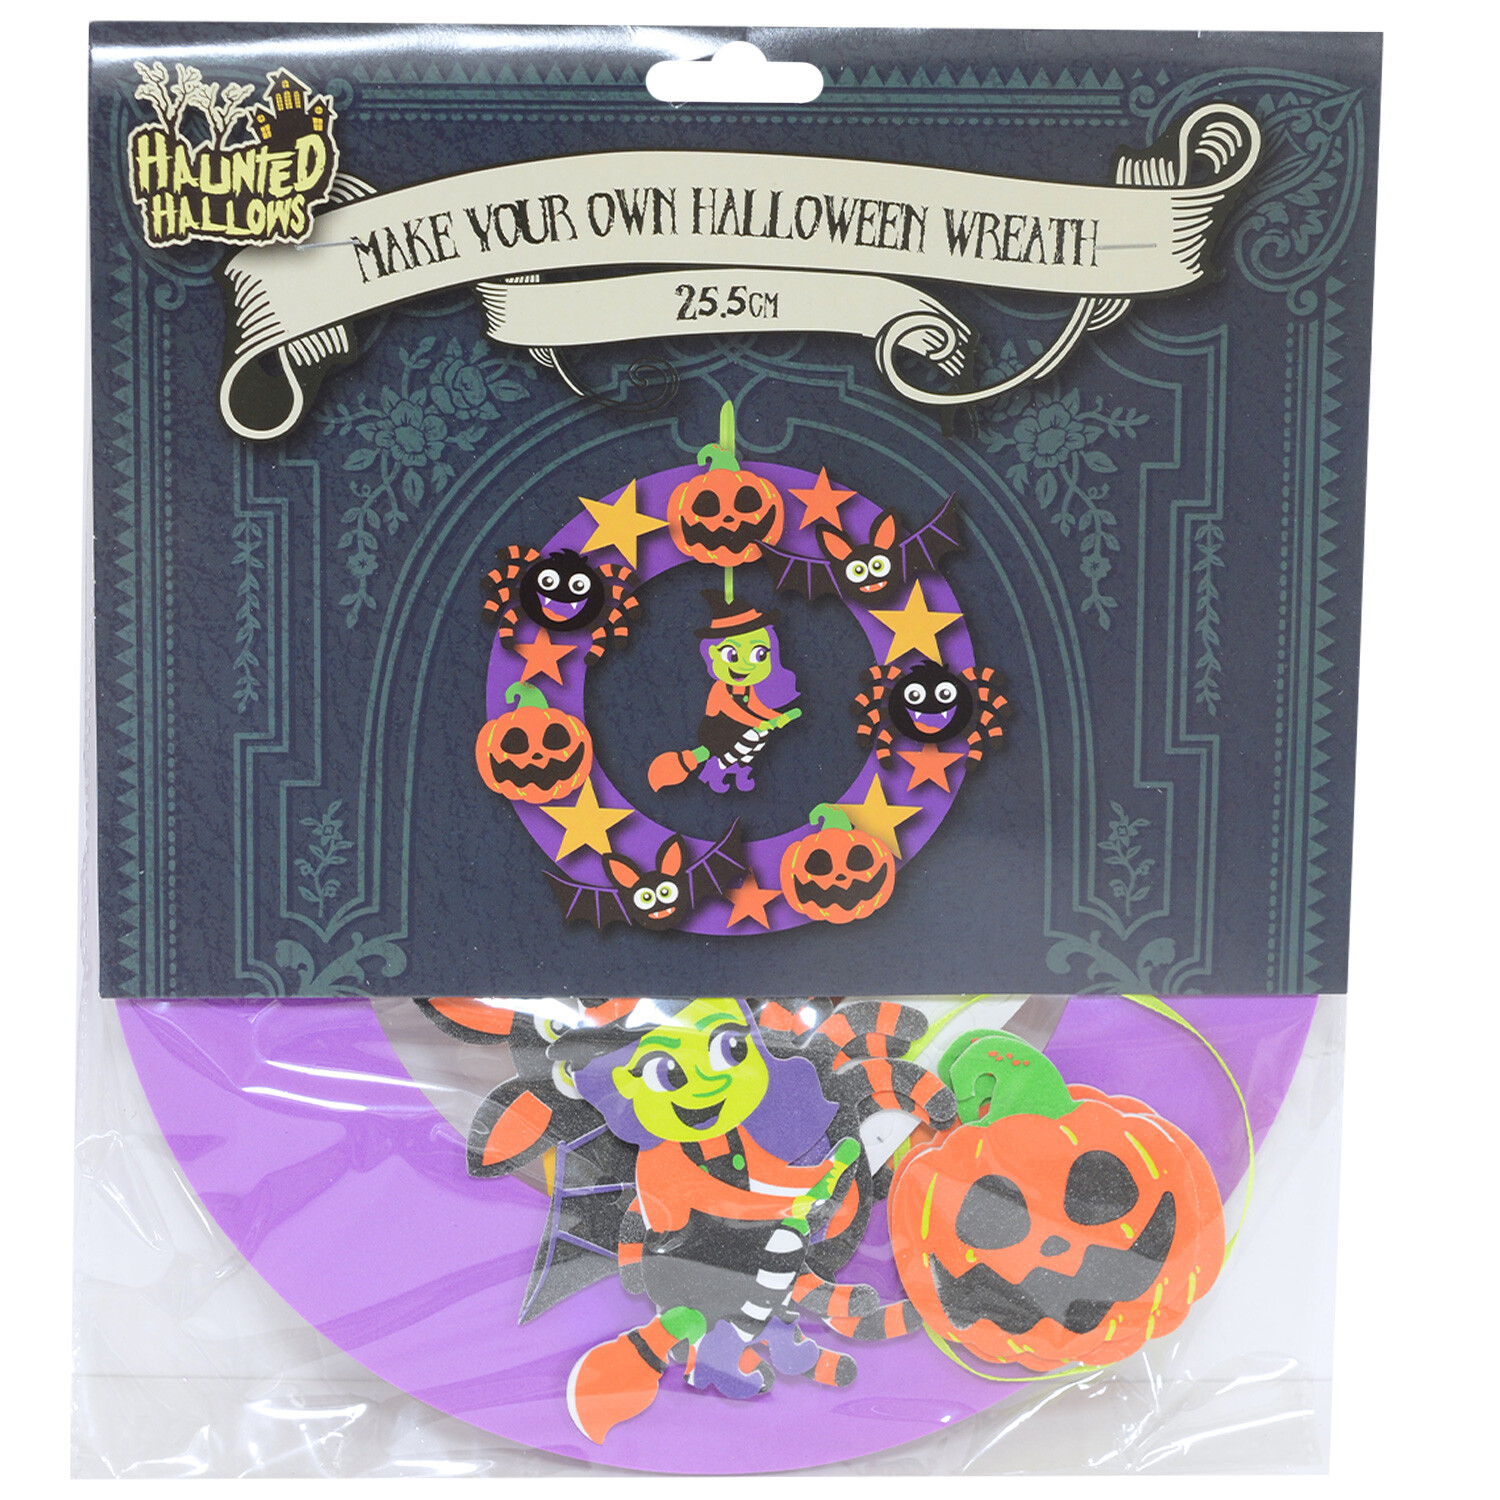 Haunted Hallows Make Your Own Halloween Wreath Image 1